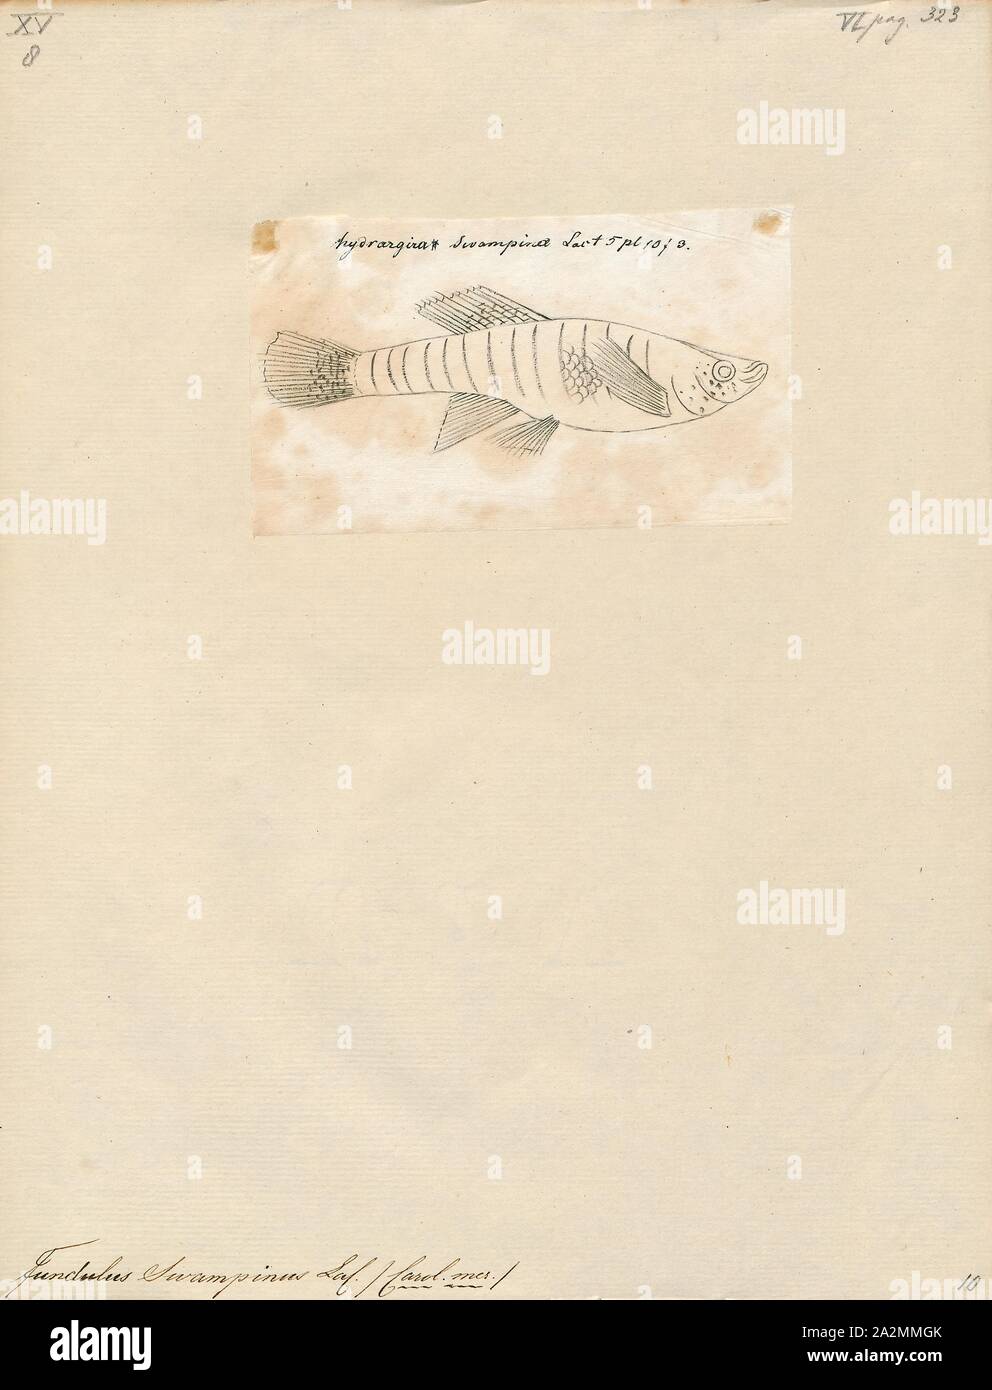 Fundulus swampinus, Print, Fundulus is a genus of ray-finned fishes in the superfamily Funduloidea, family Fundulidae (of which it is the type genus). It belongs to the order of toothcarps (Cyprinodontiformes), and therein the large suborder Cyprinodontoidei. Most of its closest living relatives are egg-laying, with the notable exception of the splitfin livebearers (Goodeidae)., 1700-1880 Stock Photo